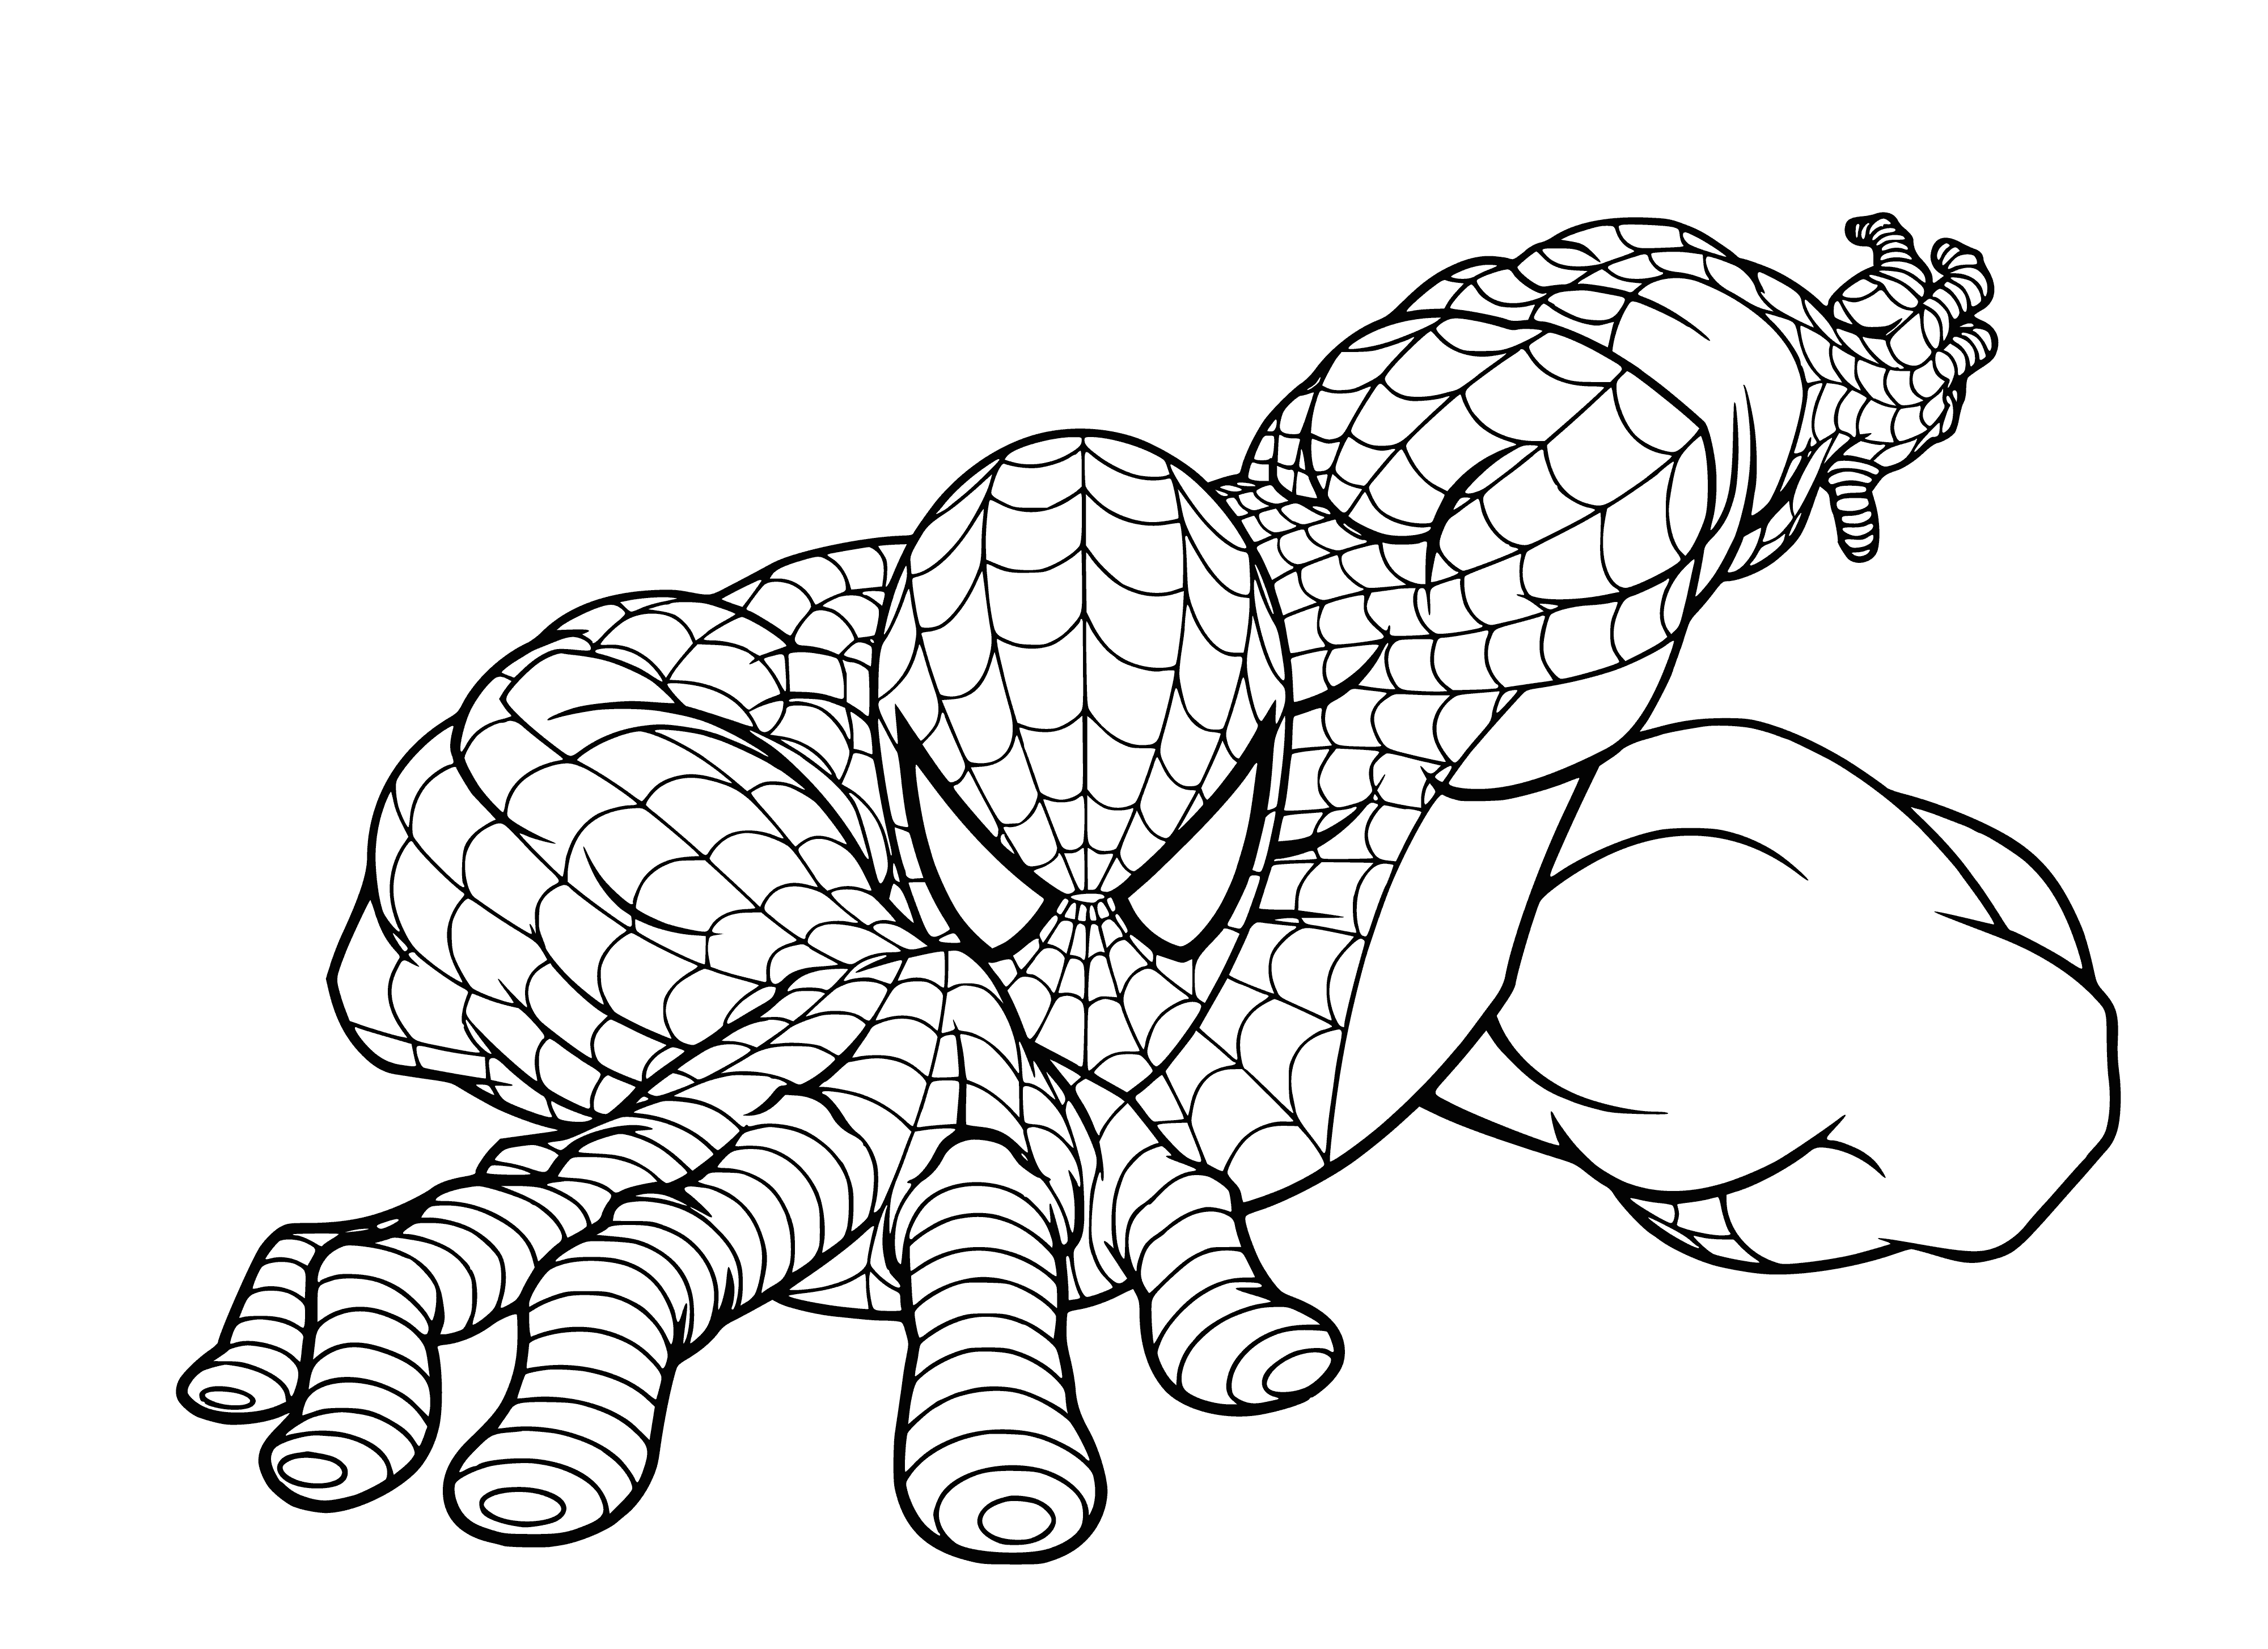 coloring page: Spiderman is a superhero with spider-like powers who fights crime in NYC.